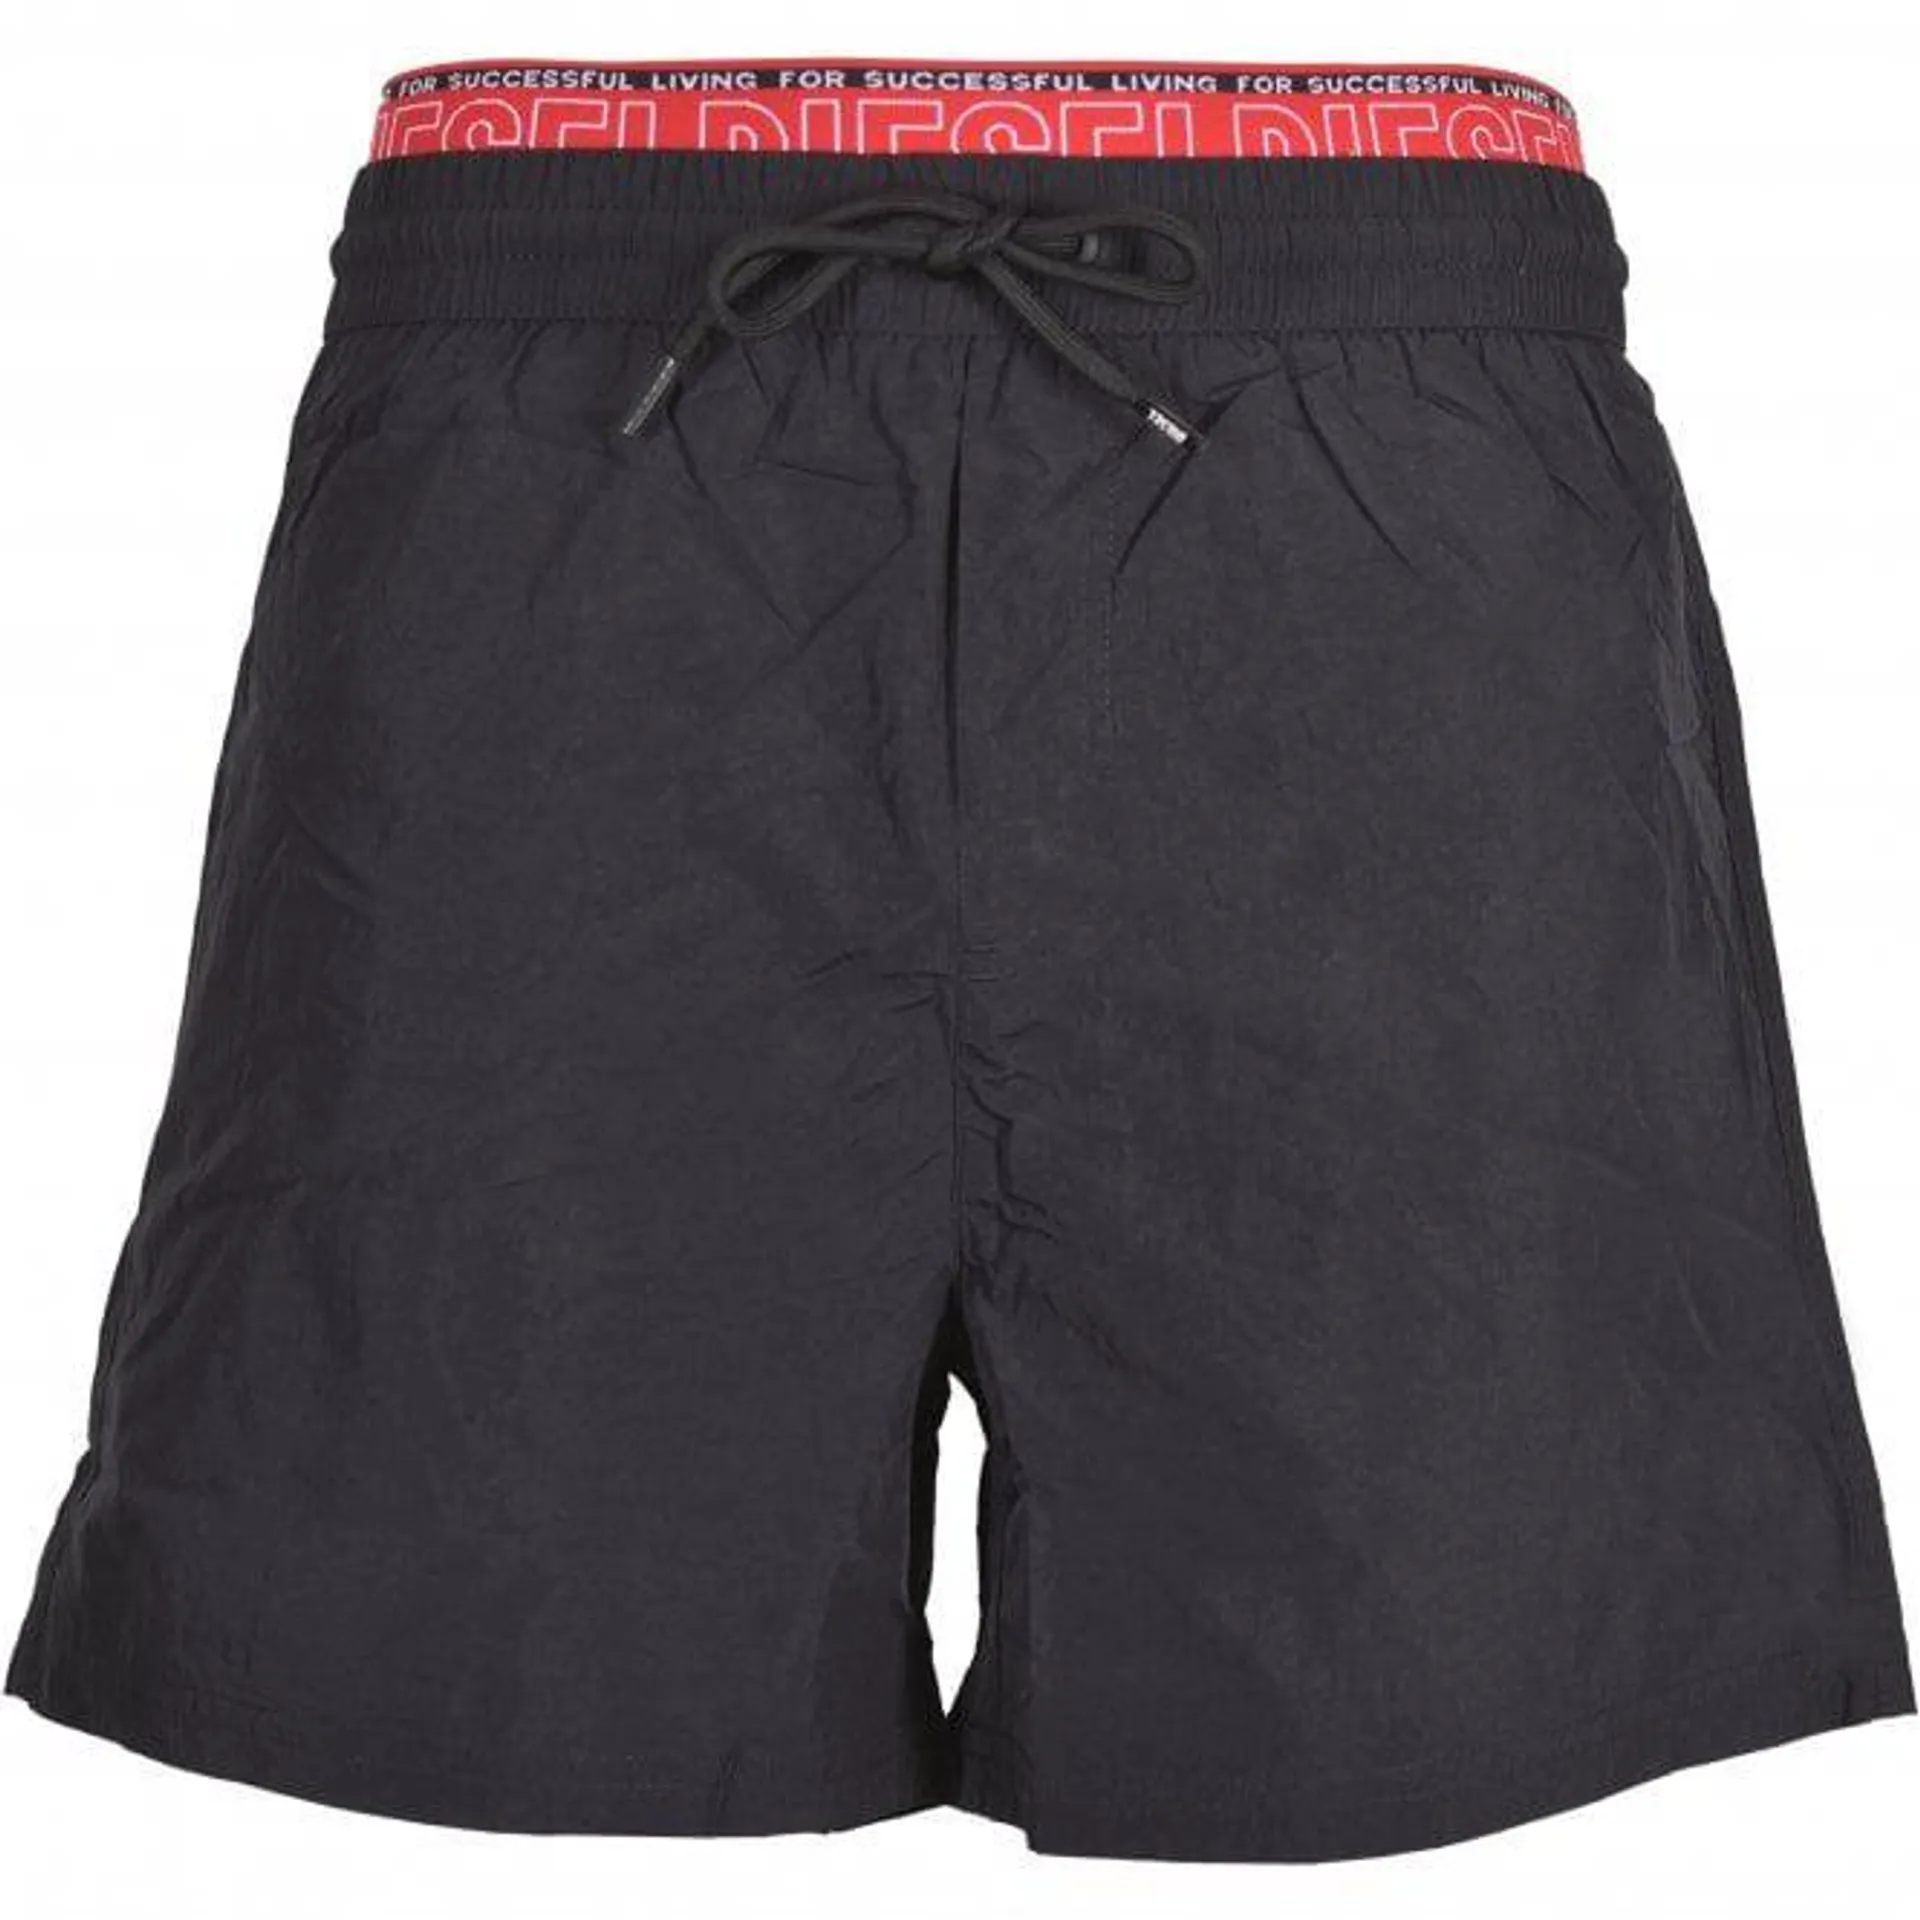 Diesel "For Successful Living" Double Waistband Swim Shorts, Black